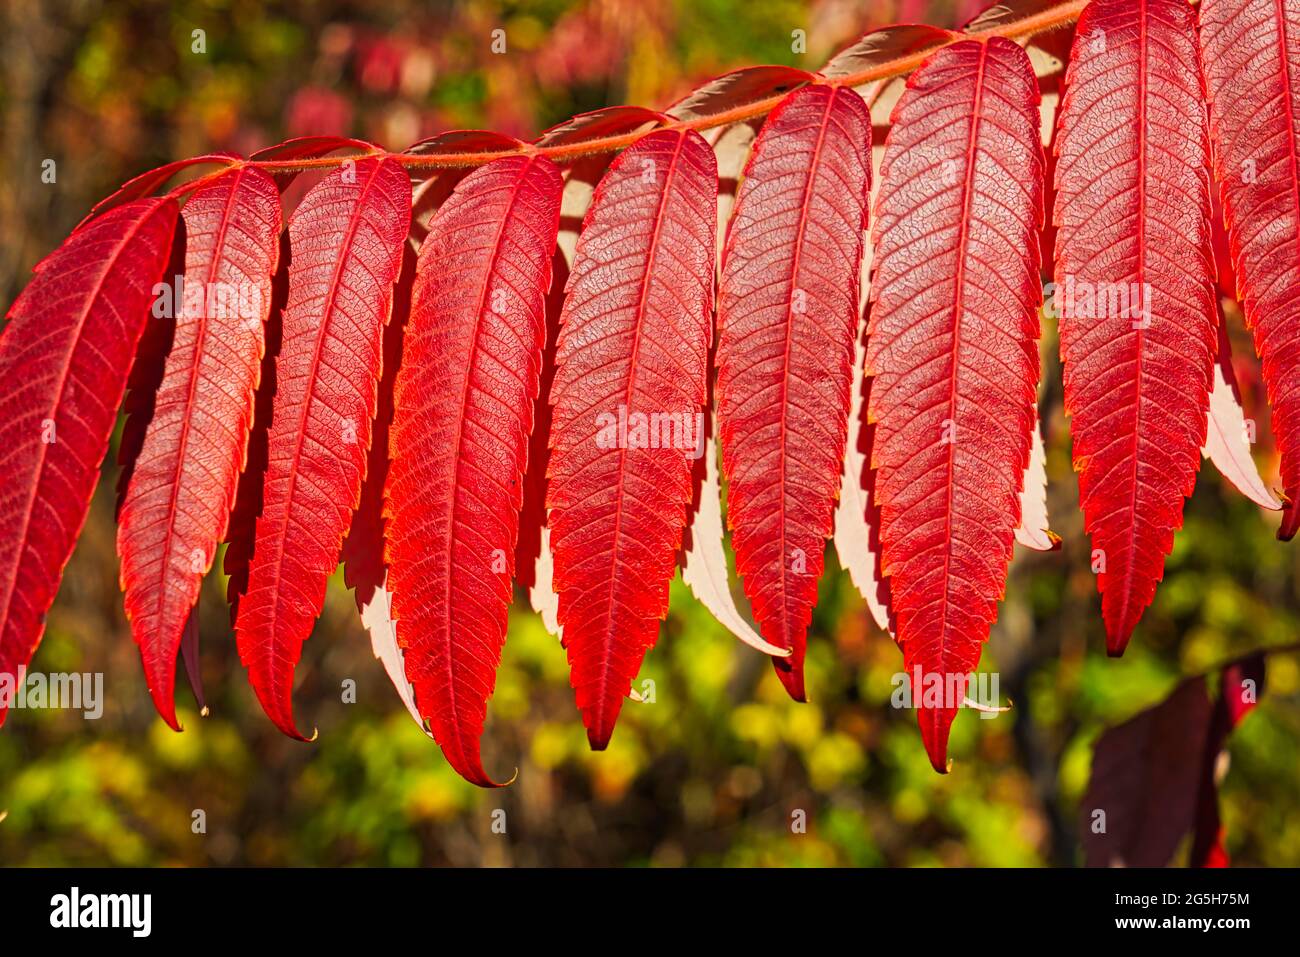 The red leaves of sumac in autumn: extremely colorful fall foliage.A cityscape overflowing with French style. Quebec, Canada, October 2016. Stock Photo